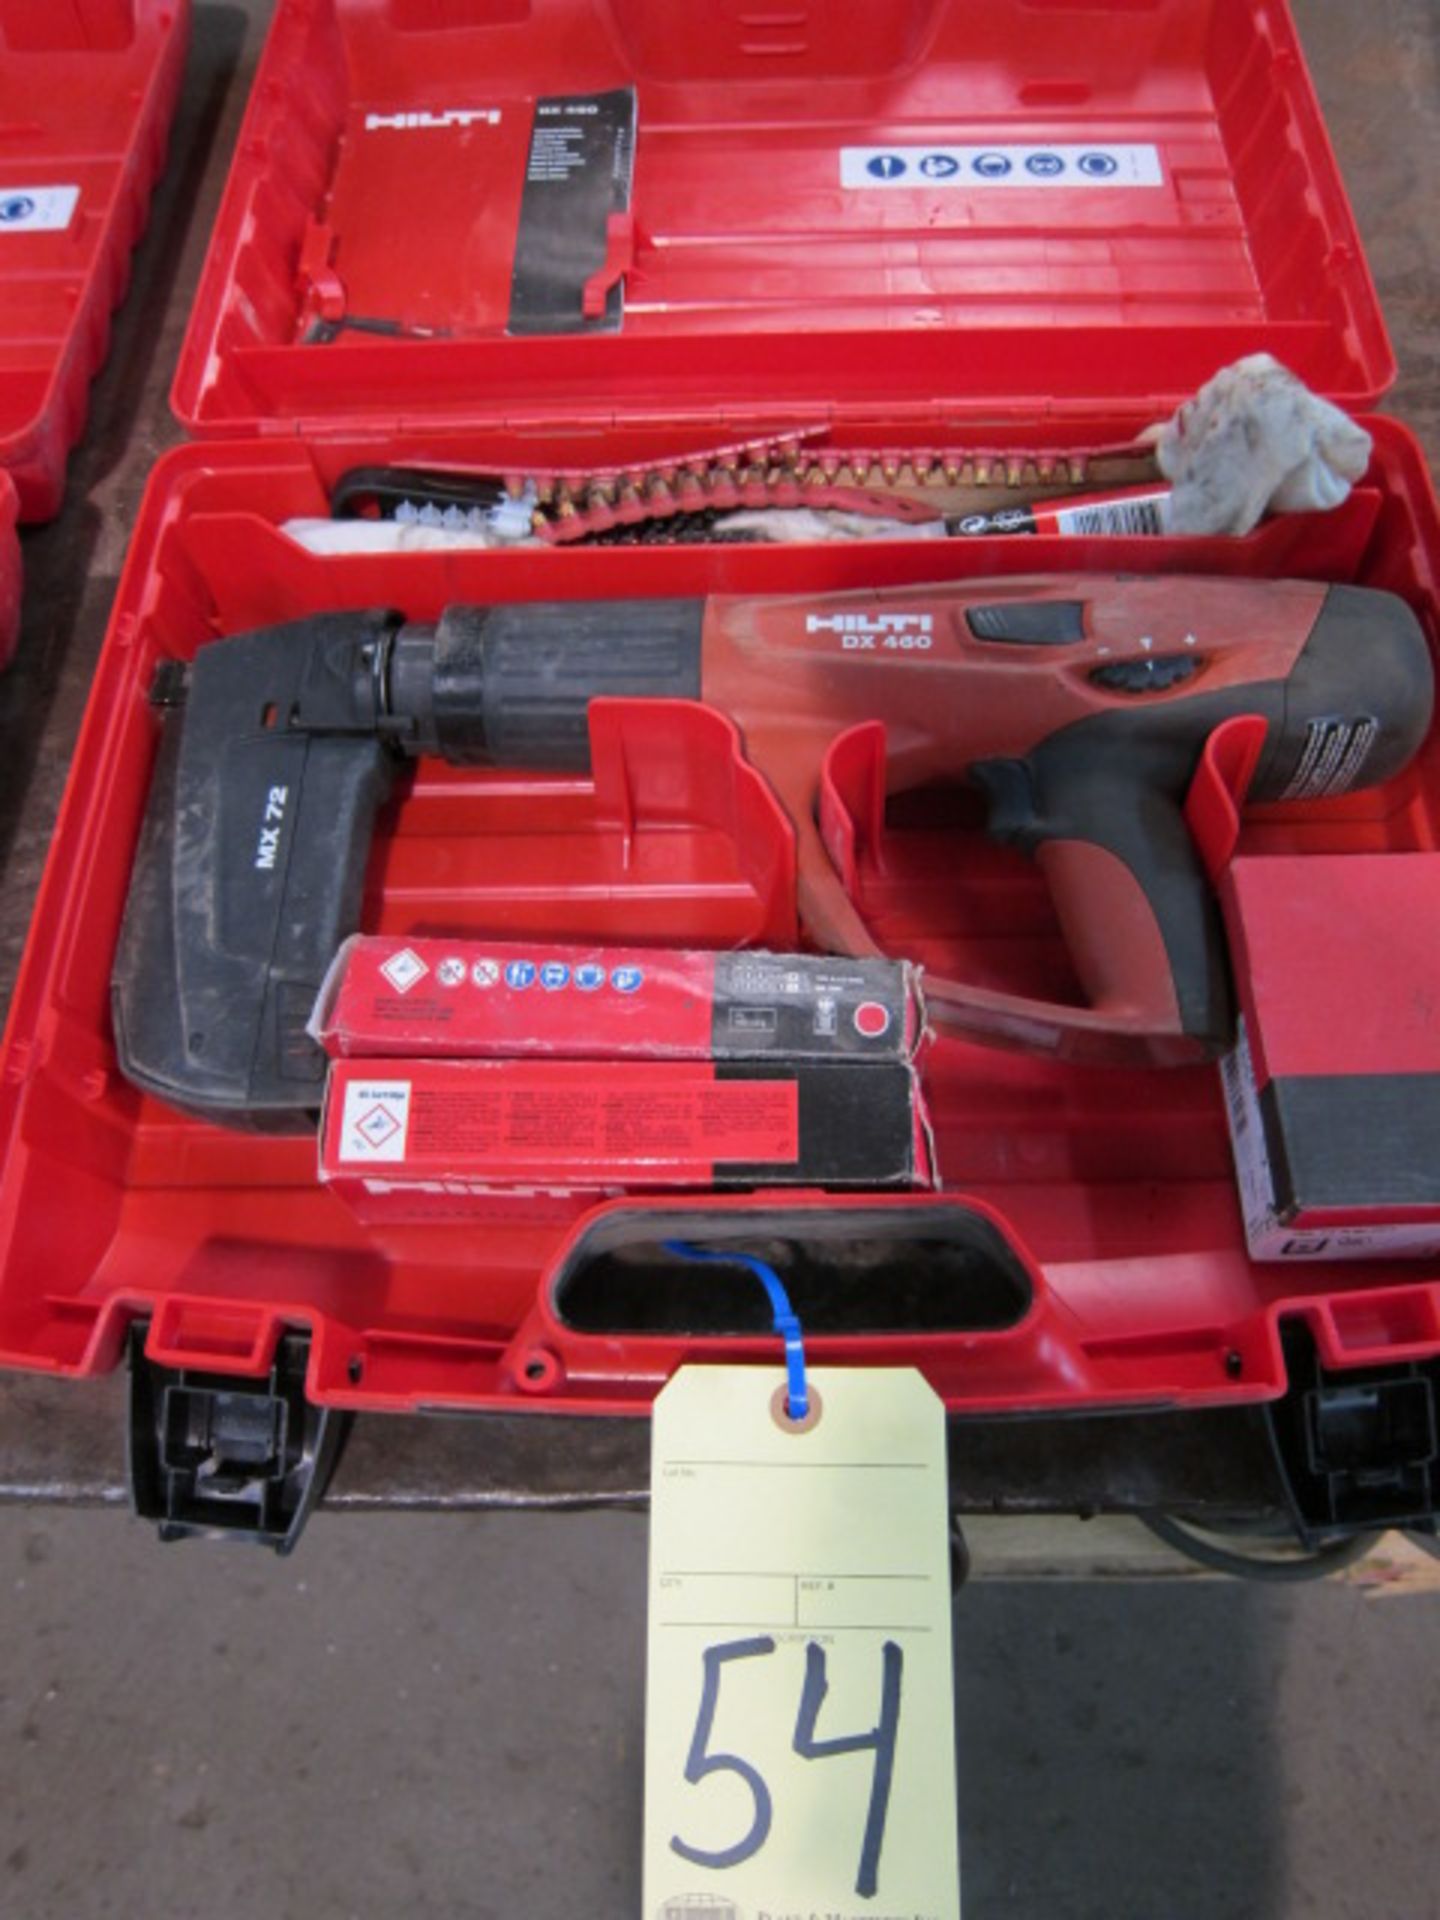 POWER ACTUATED TOOL, HILTI MDL. DX460